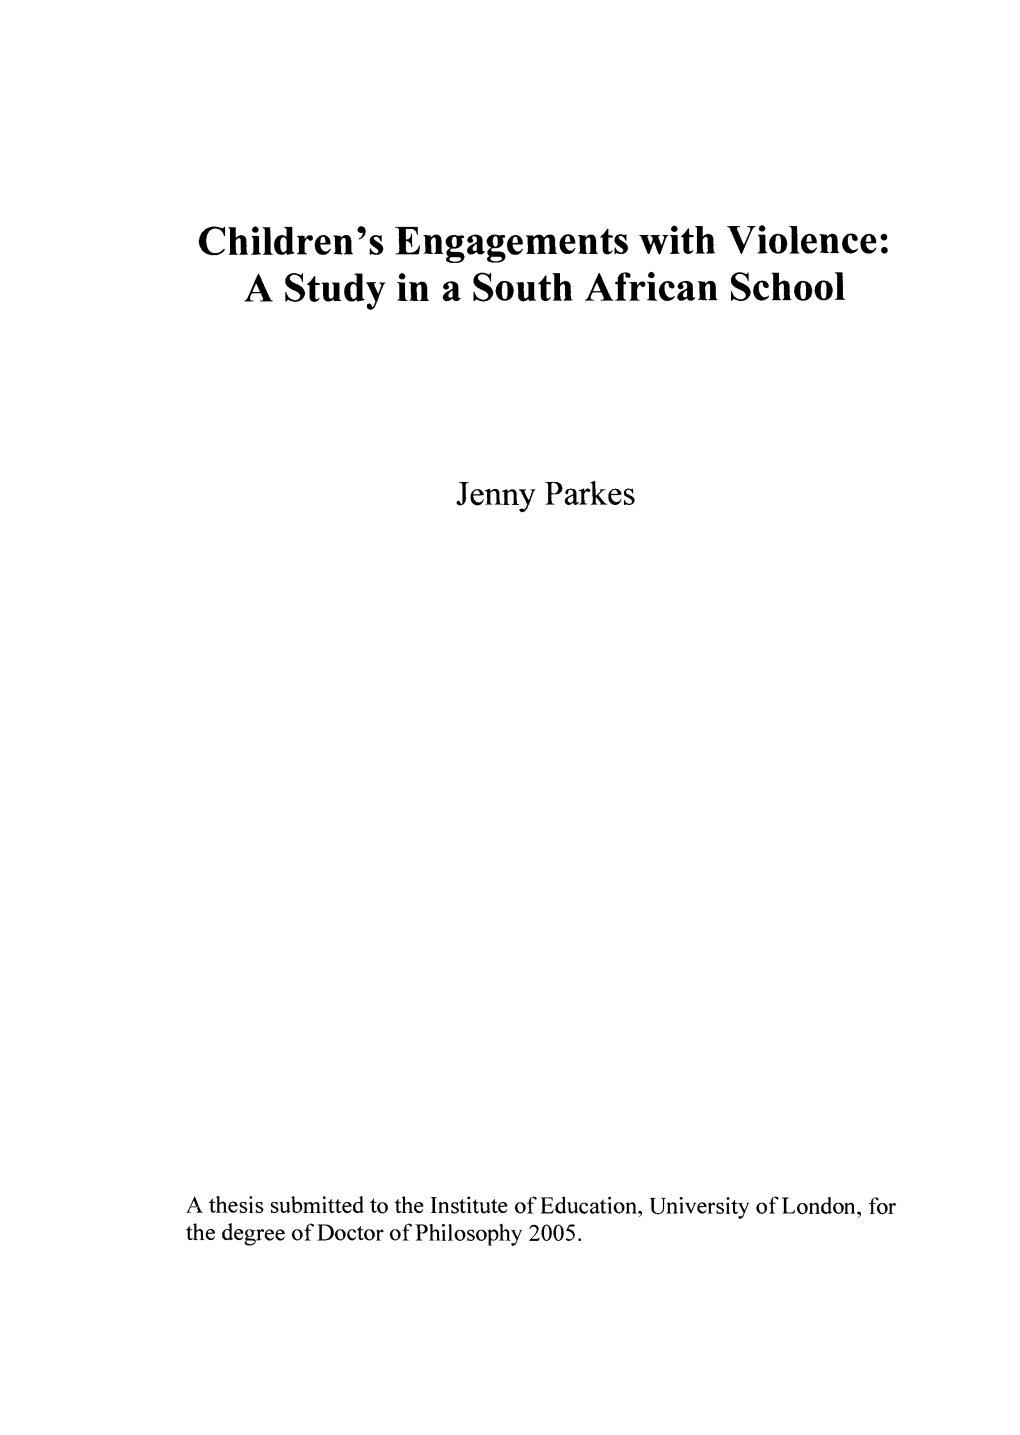 Children's Engagements with Violence: a Study in a South African School